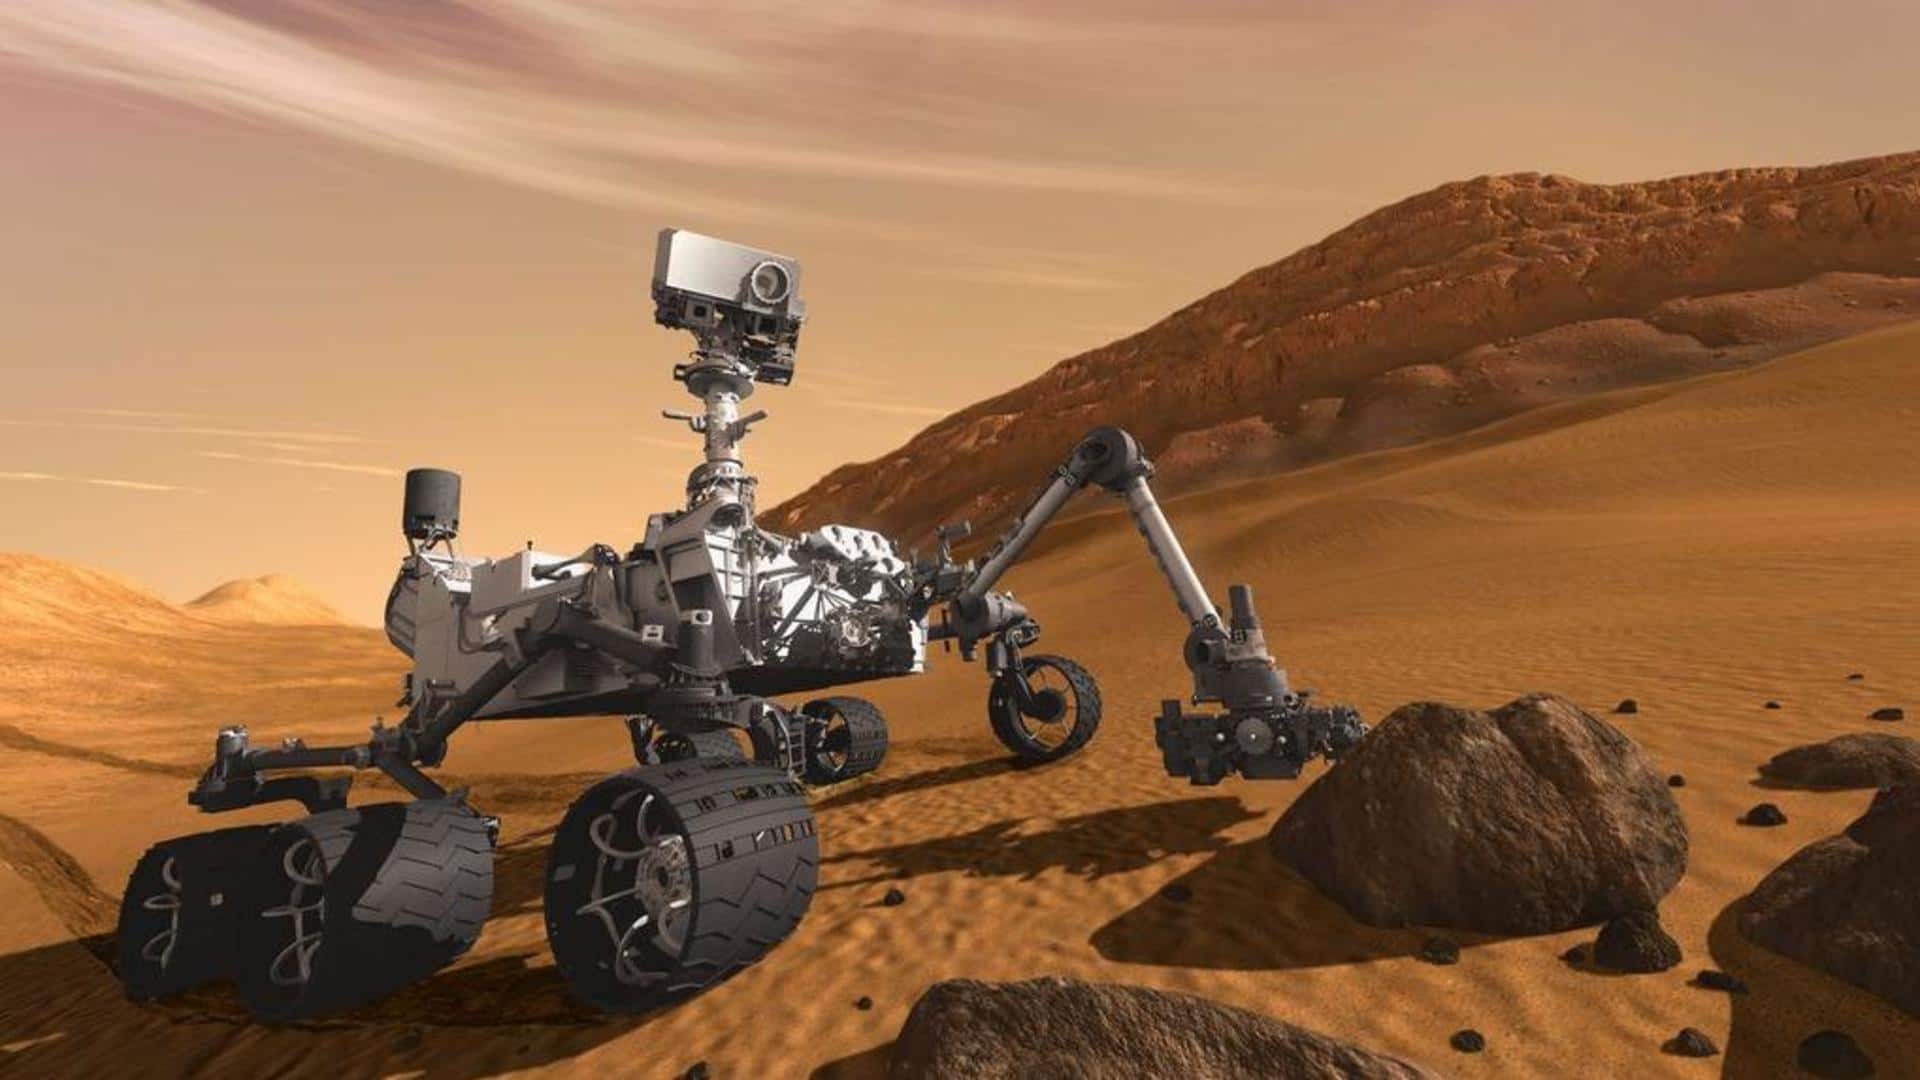 NASA's Curiosity Mars Rover can now drive faster